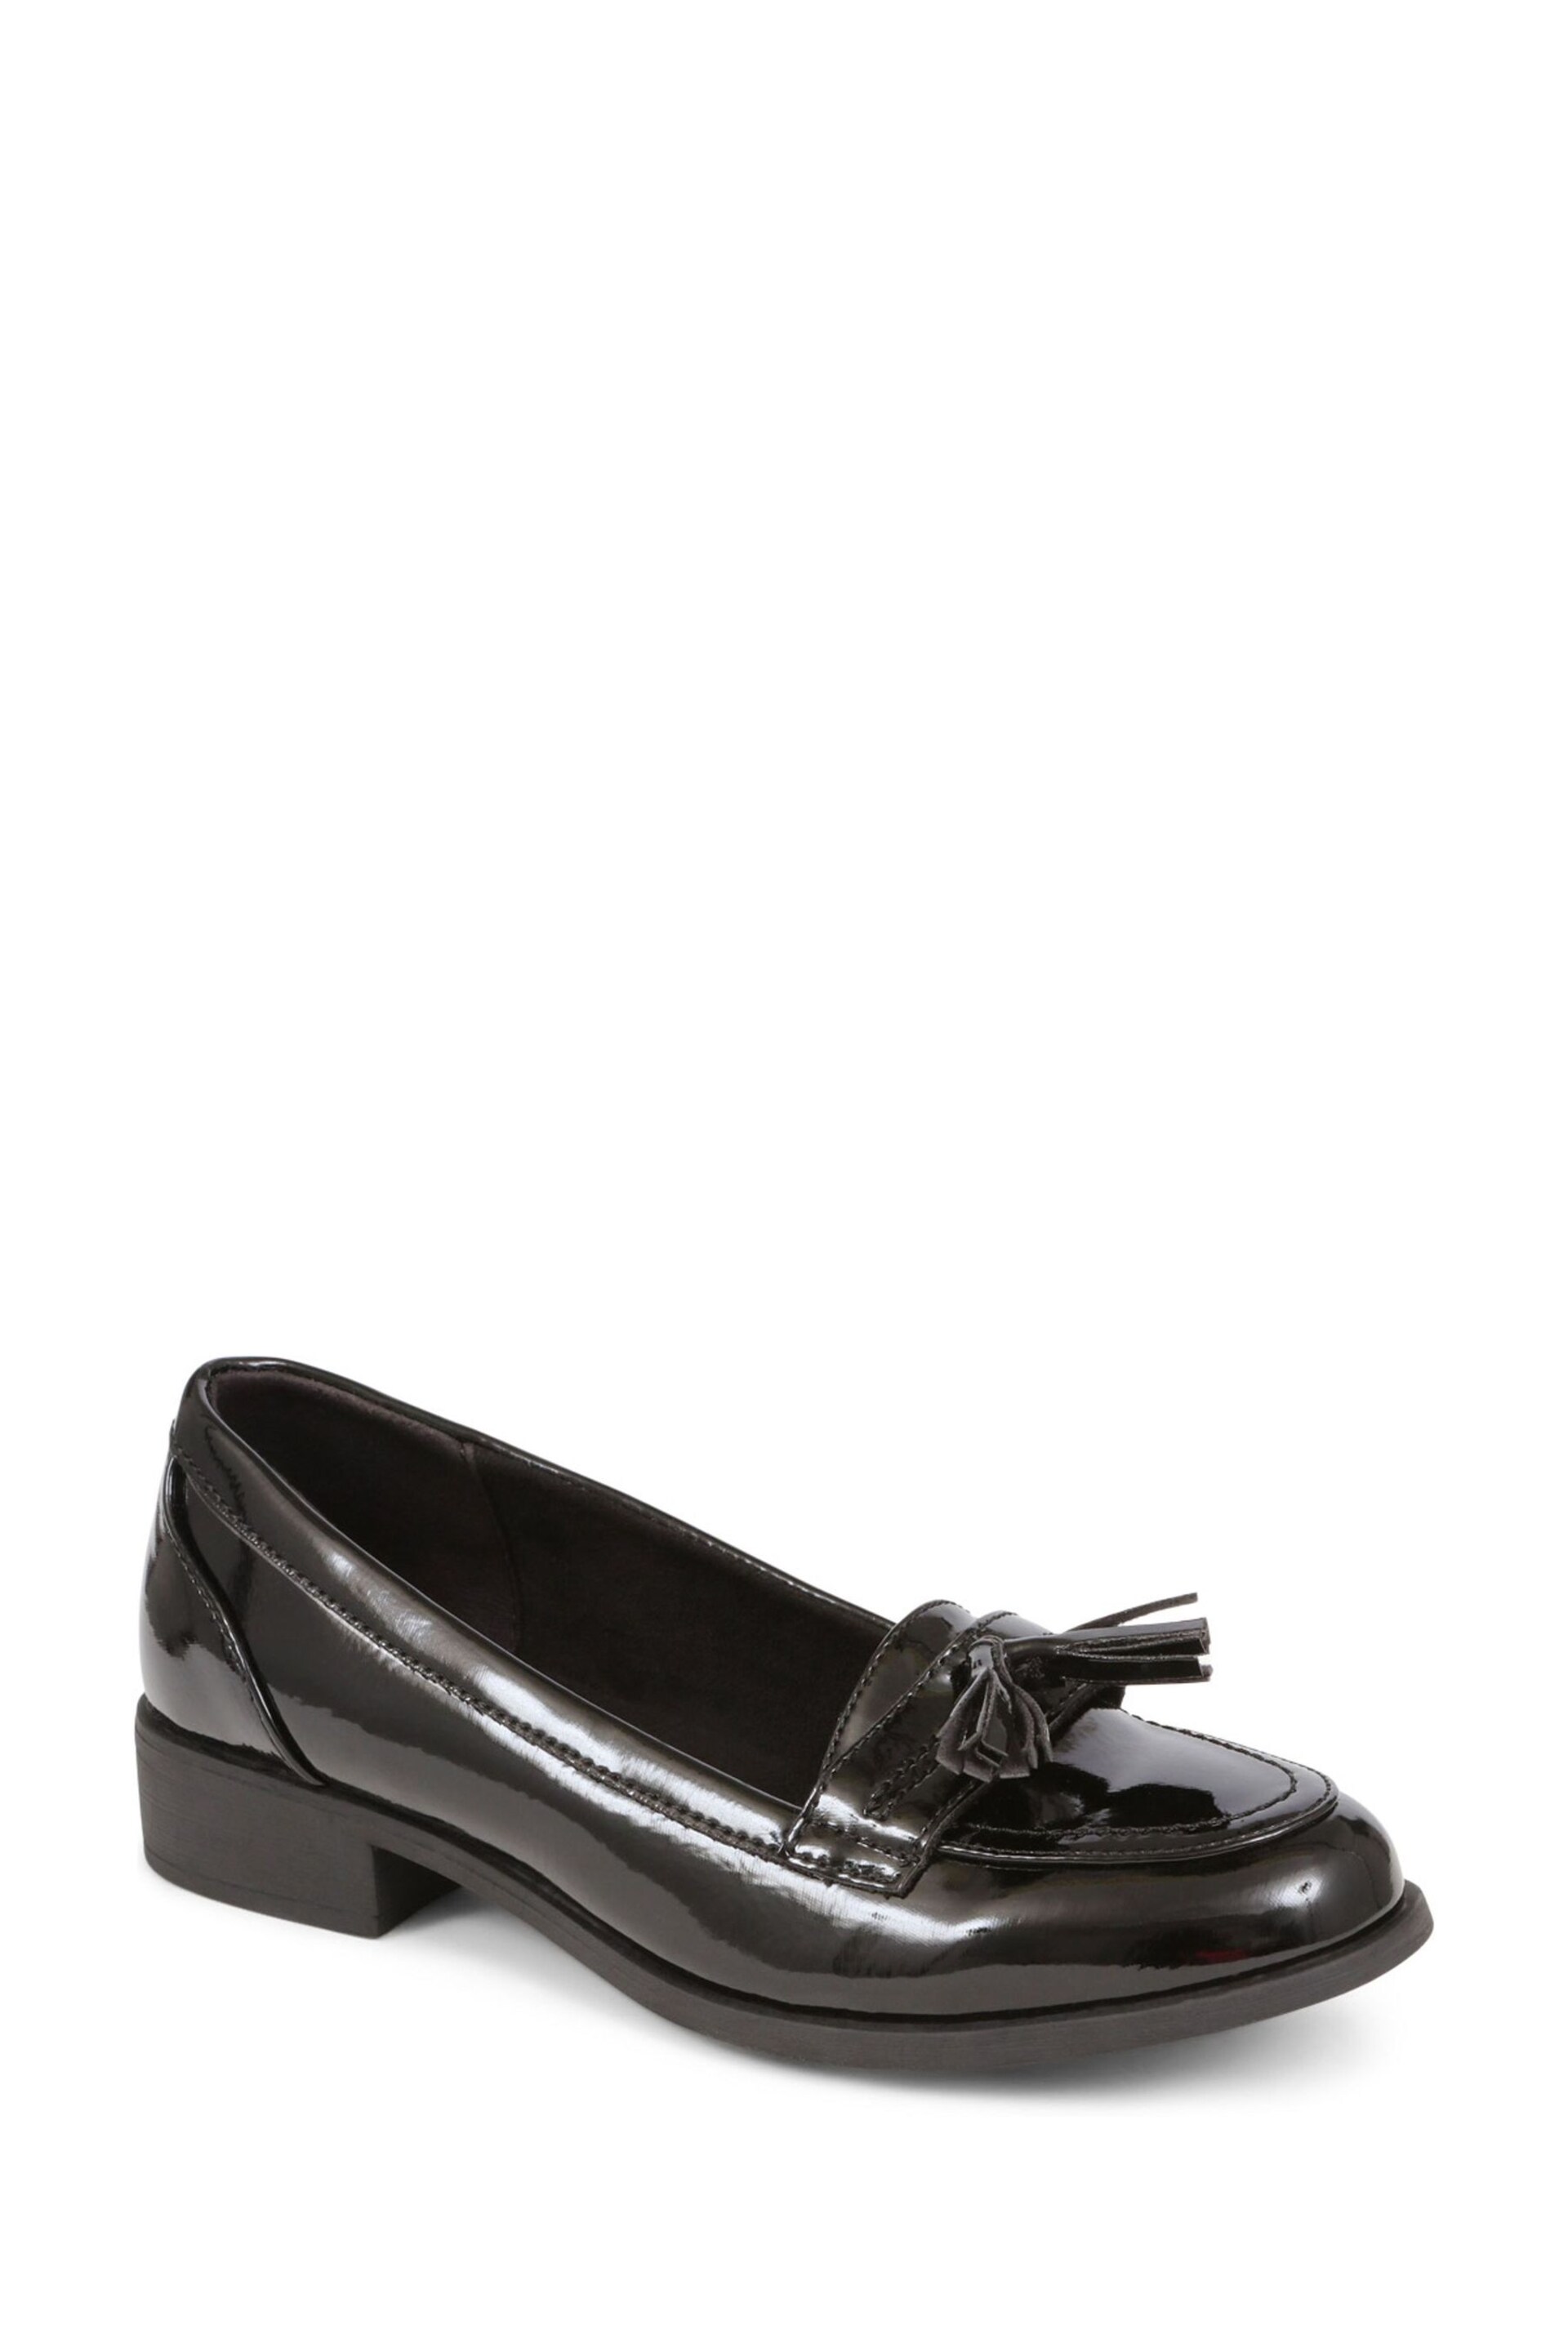 Pavers Smart Patent Black Loafers - Image 2 of 5